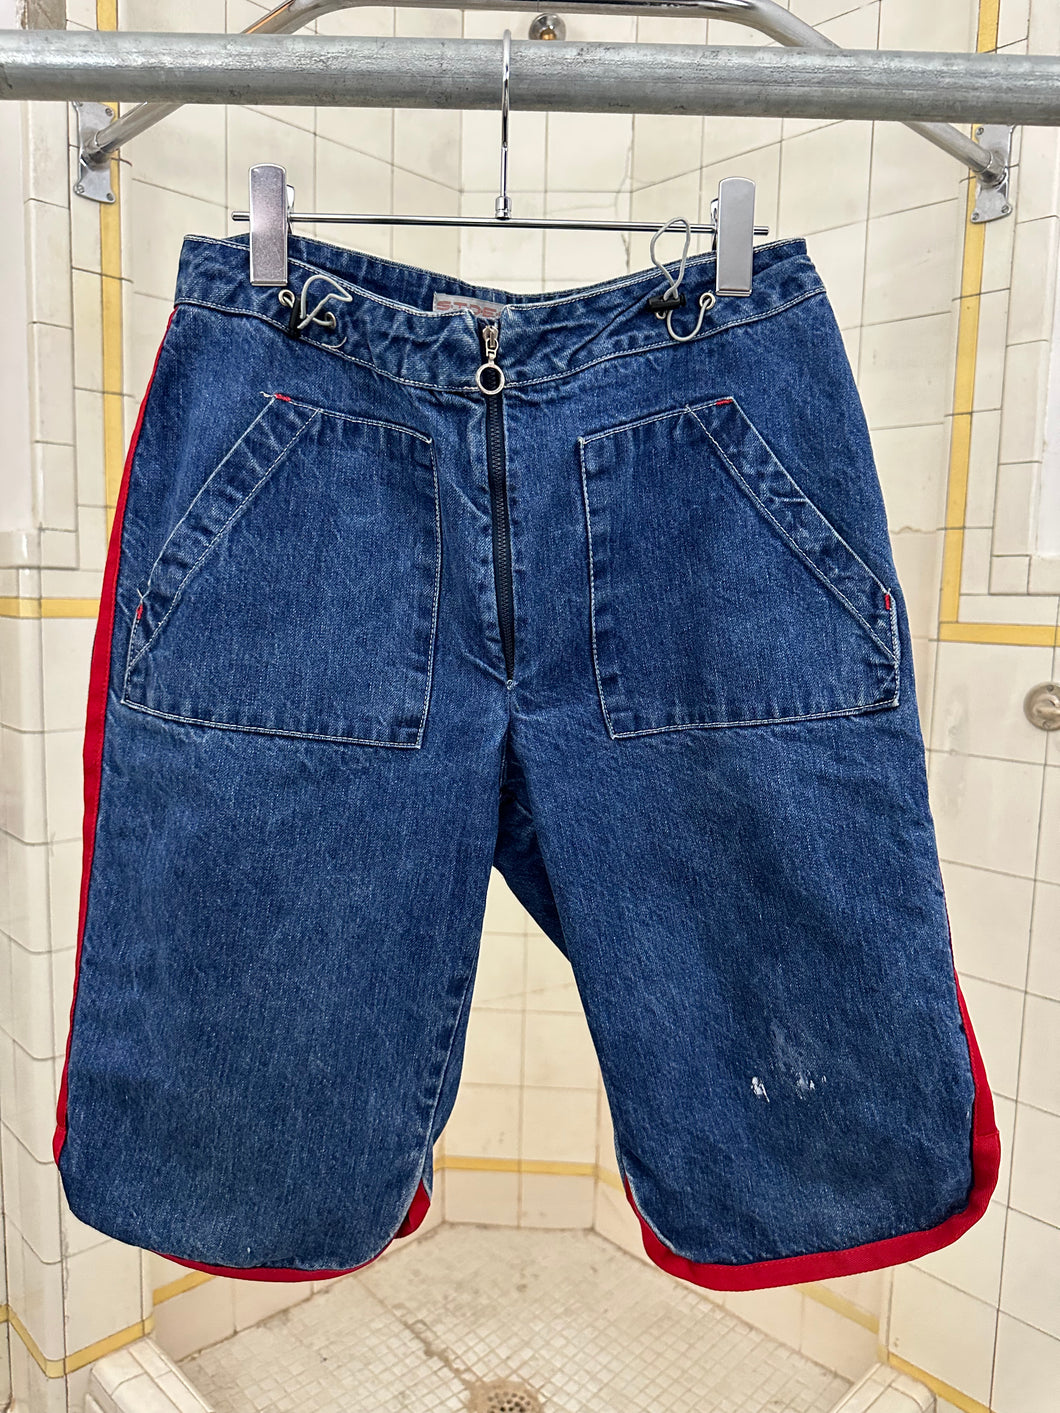 1990s Vintage Sideskid Women's Denim Shorts with Red Piping - Size Women's L